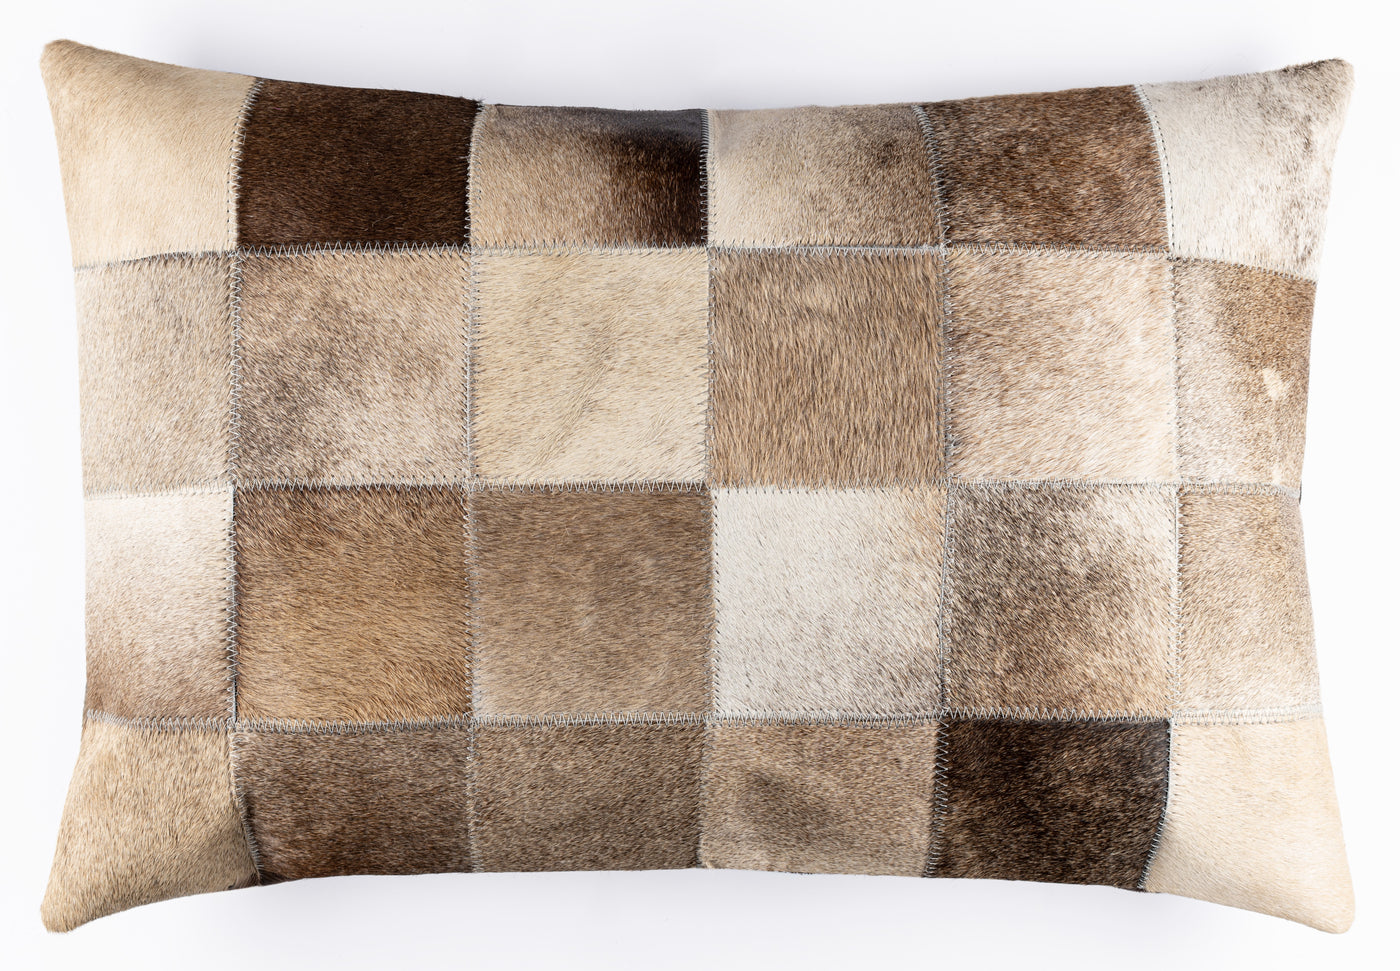 Canvello Genuine Cowhide Leather Decorative Throw Pillows - Handmade Patchwork Boho Accent Pillows For Sofa, Couch, Bed, Chair - Western Southwestern Farmhouse Pillow Covers With Feather Down Insert Included